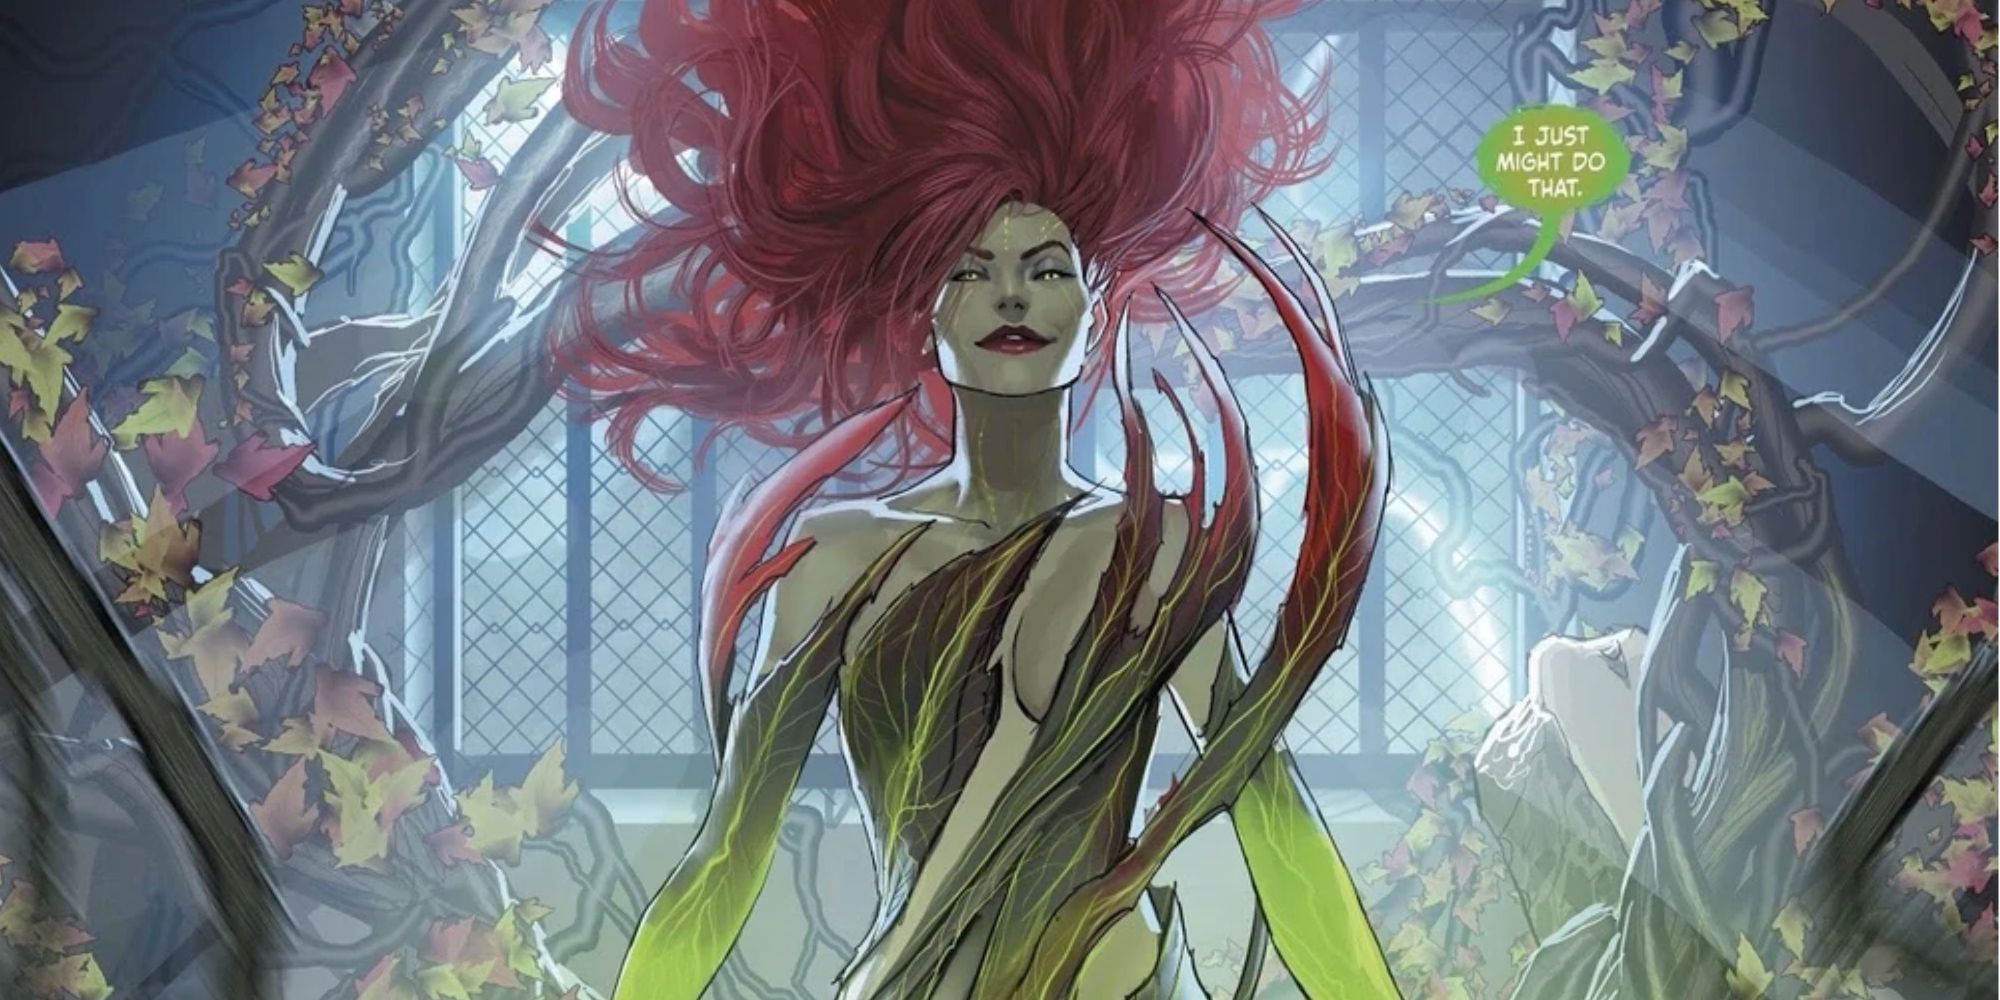 Poison Ivy controls plants in Harleen comic.